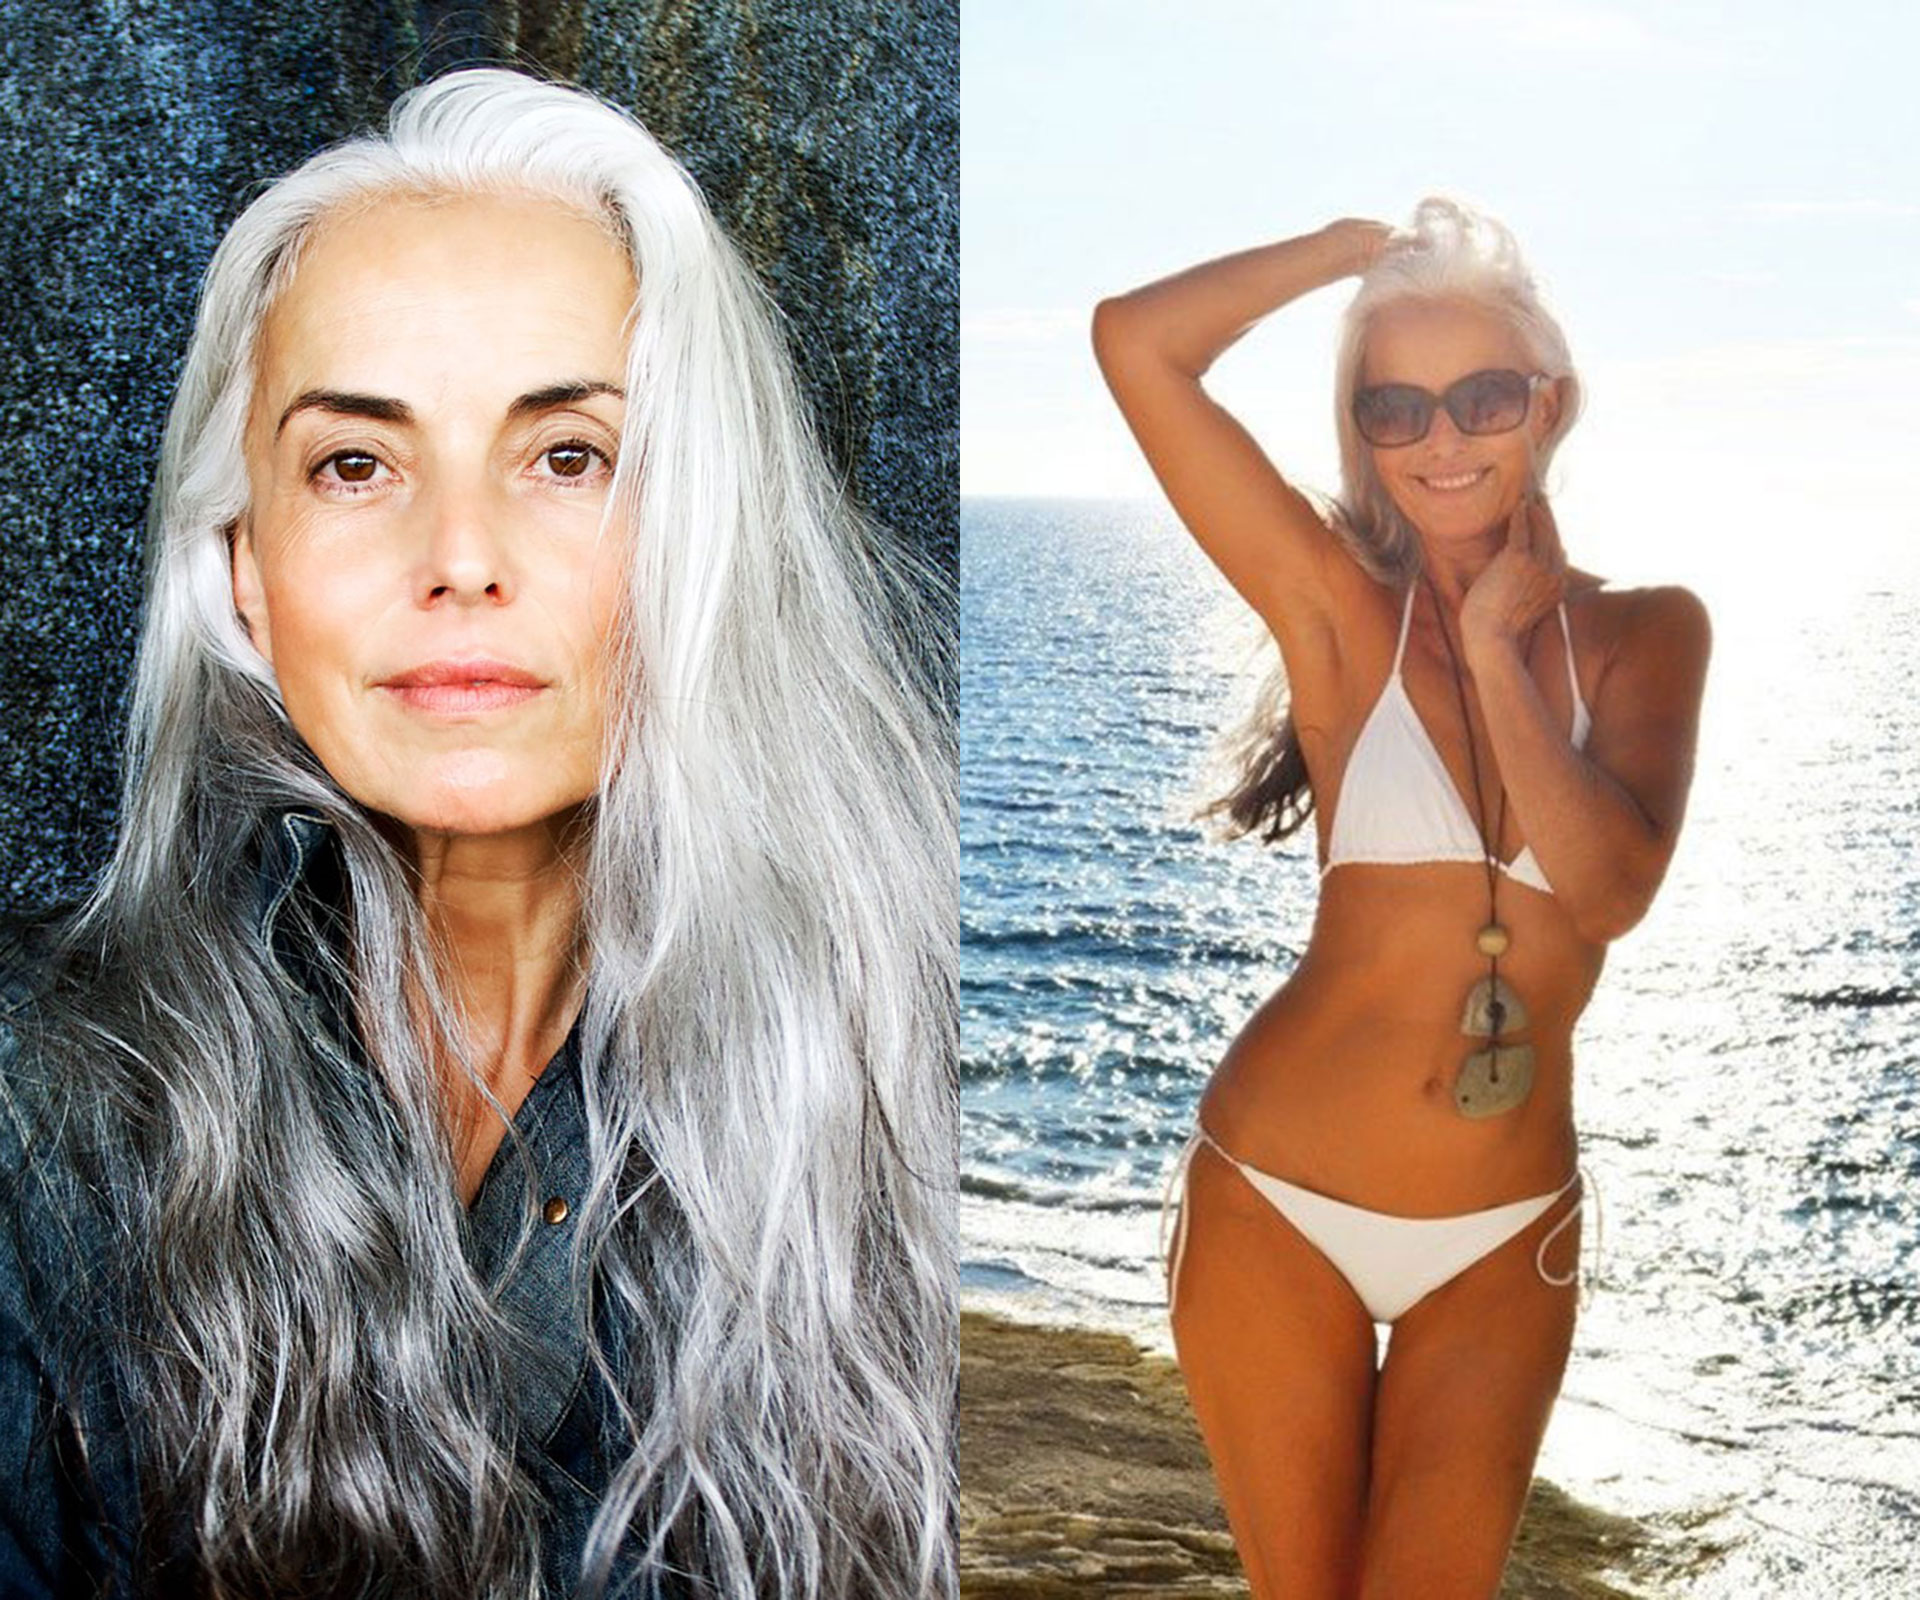 A stunning 64-year-old grandmother has revealed her secrets to looking young